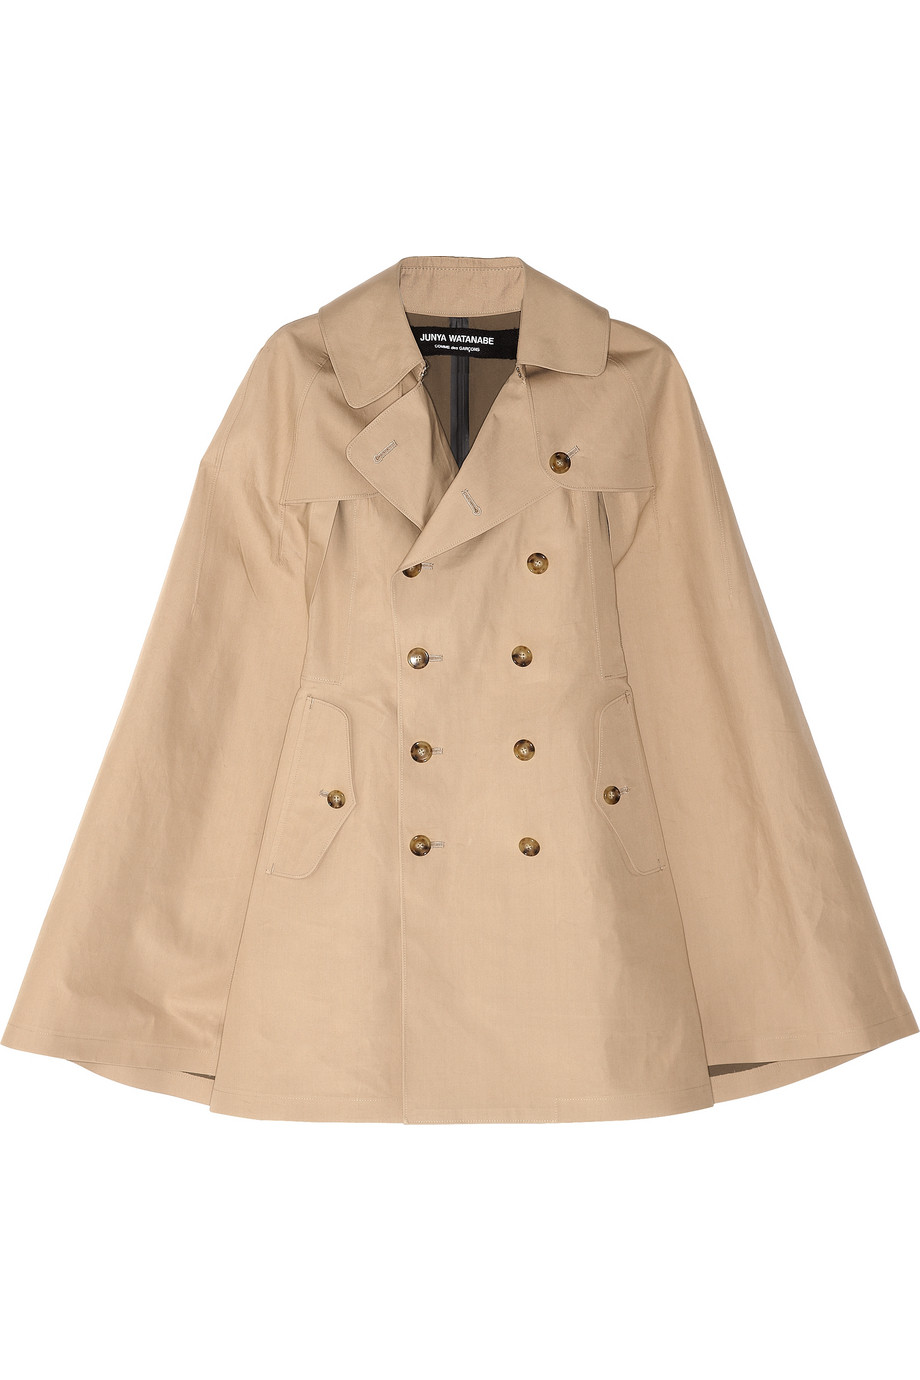 Lyst - Junya Watanabe Double-Breasted Cotton Cape in Natural